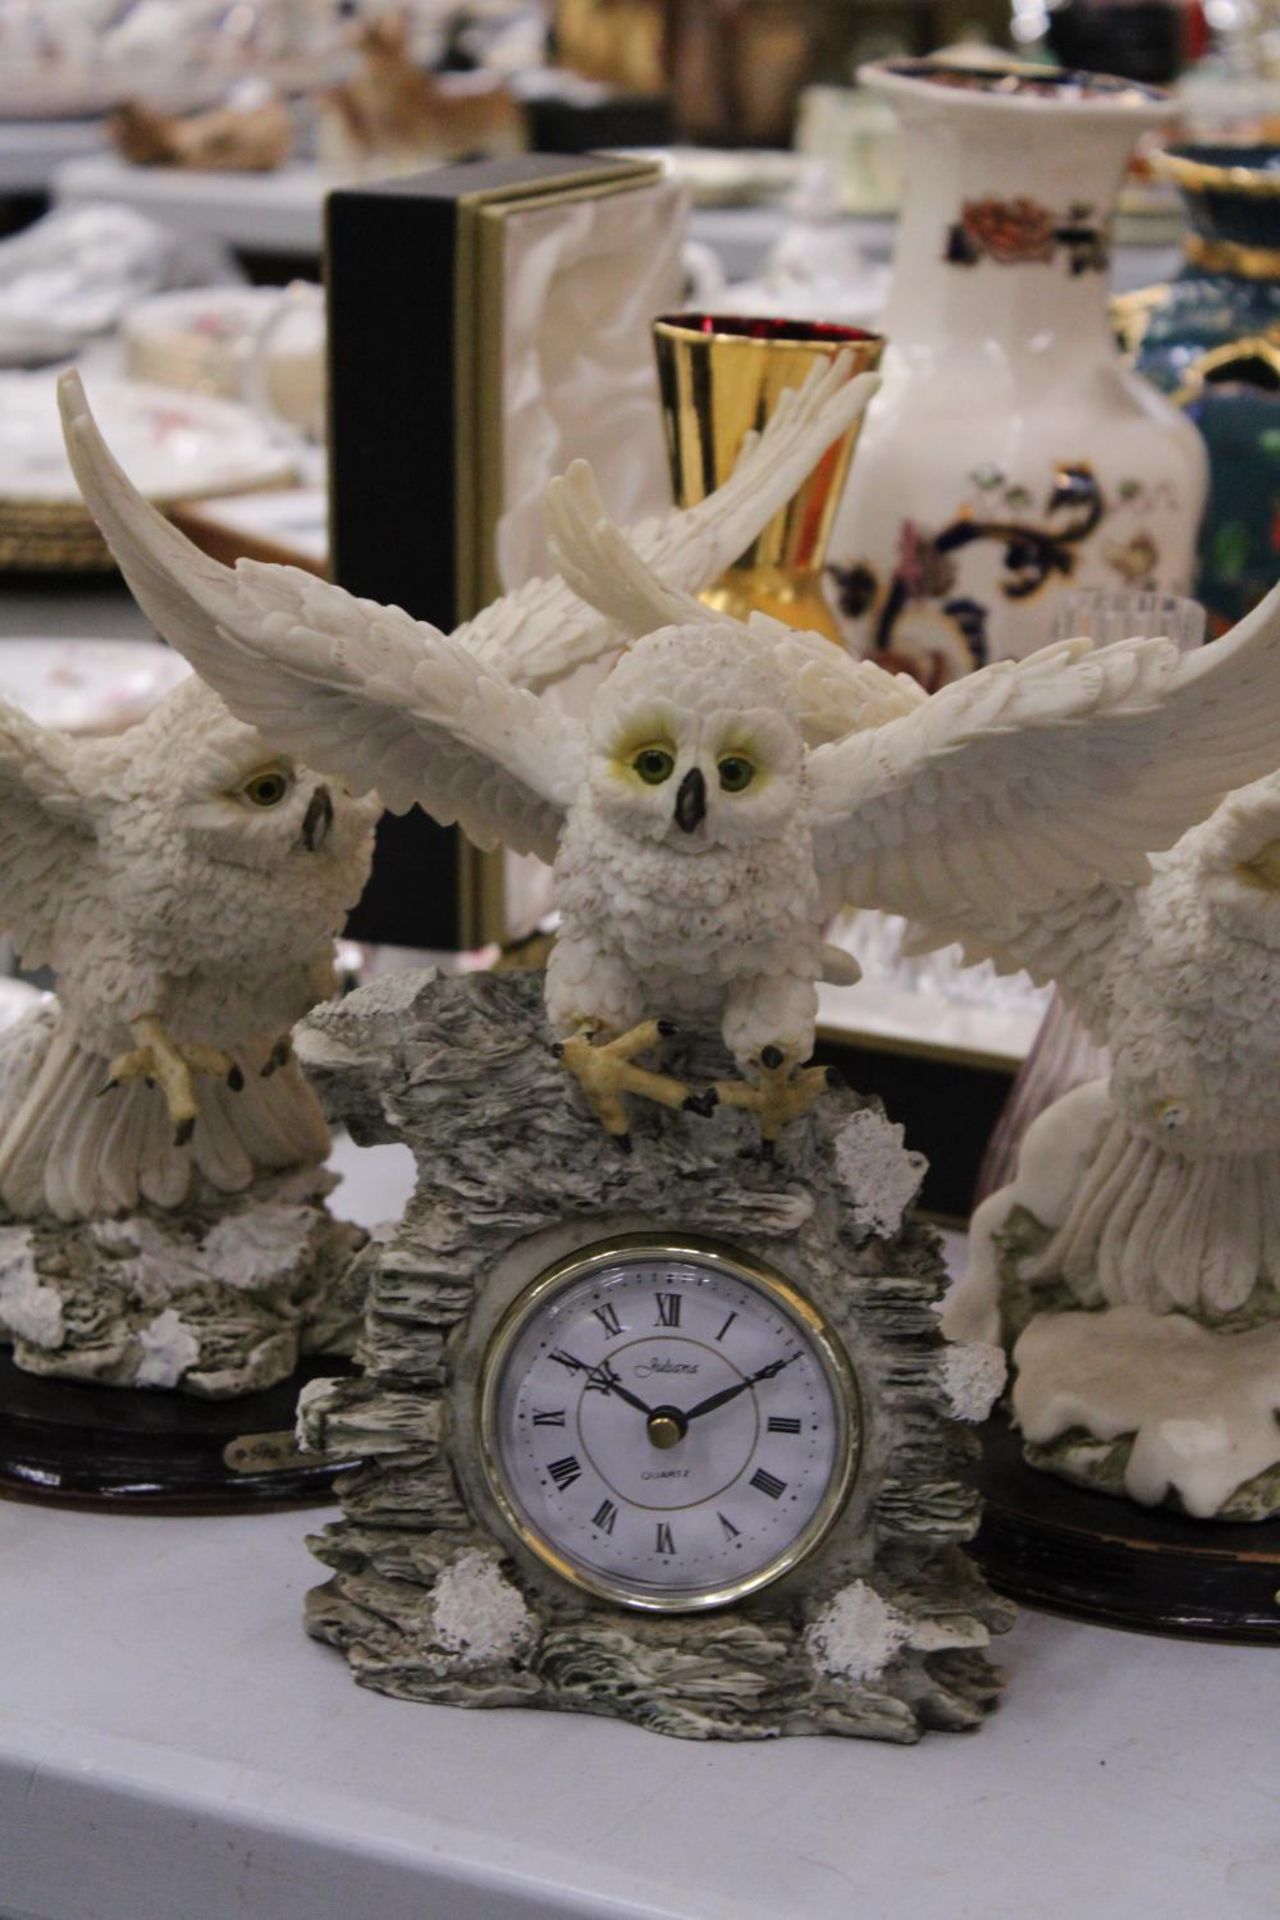 THREE LARGE RESIN 'JULIANA' MODELS OF OWLS TO INCLUDE A CLOCK - Image 2 of 5